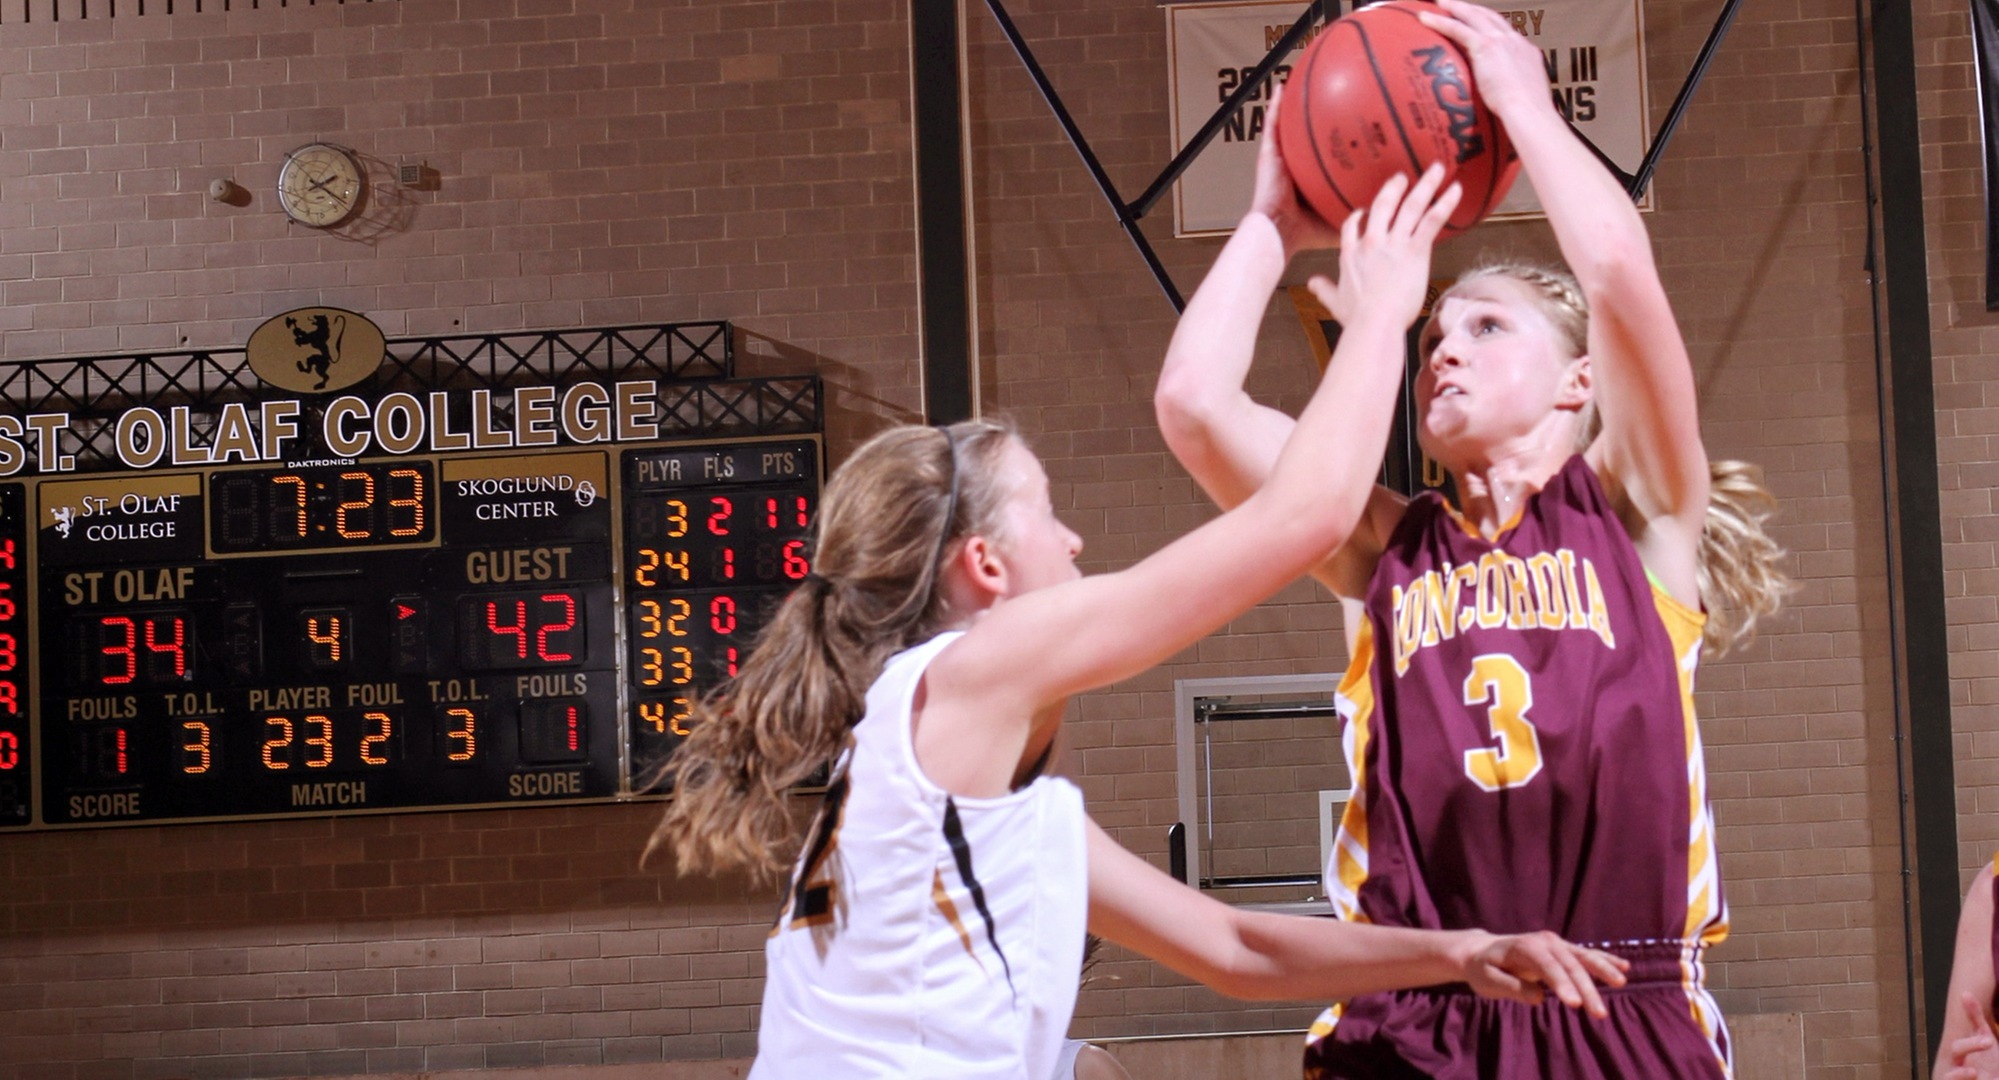 Senior Greta Walsh drives to the basket in the fourth quarter for two of her game-high 21 points in the Cobbers' win at St. Olaf. (Photo courtesy of St. Olaf Sports Information Department)